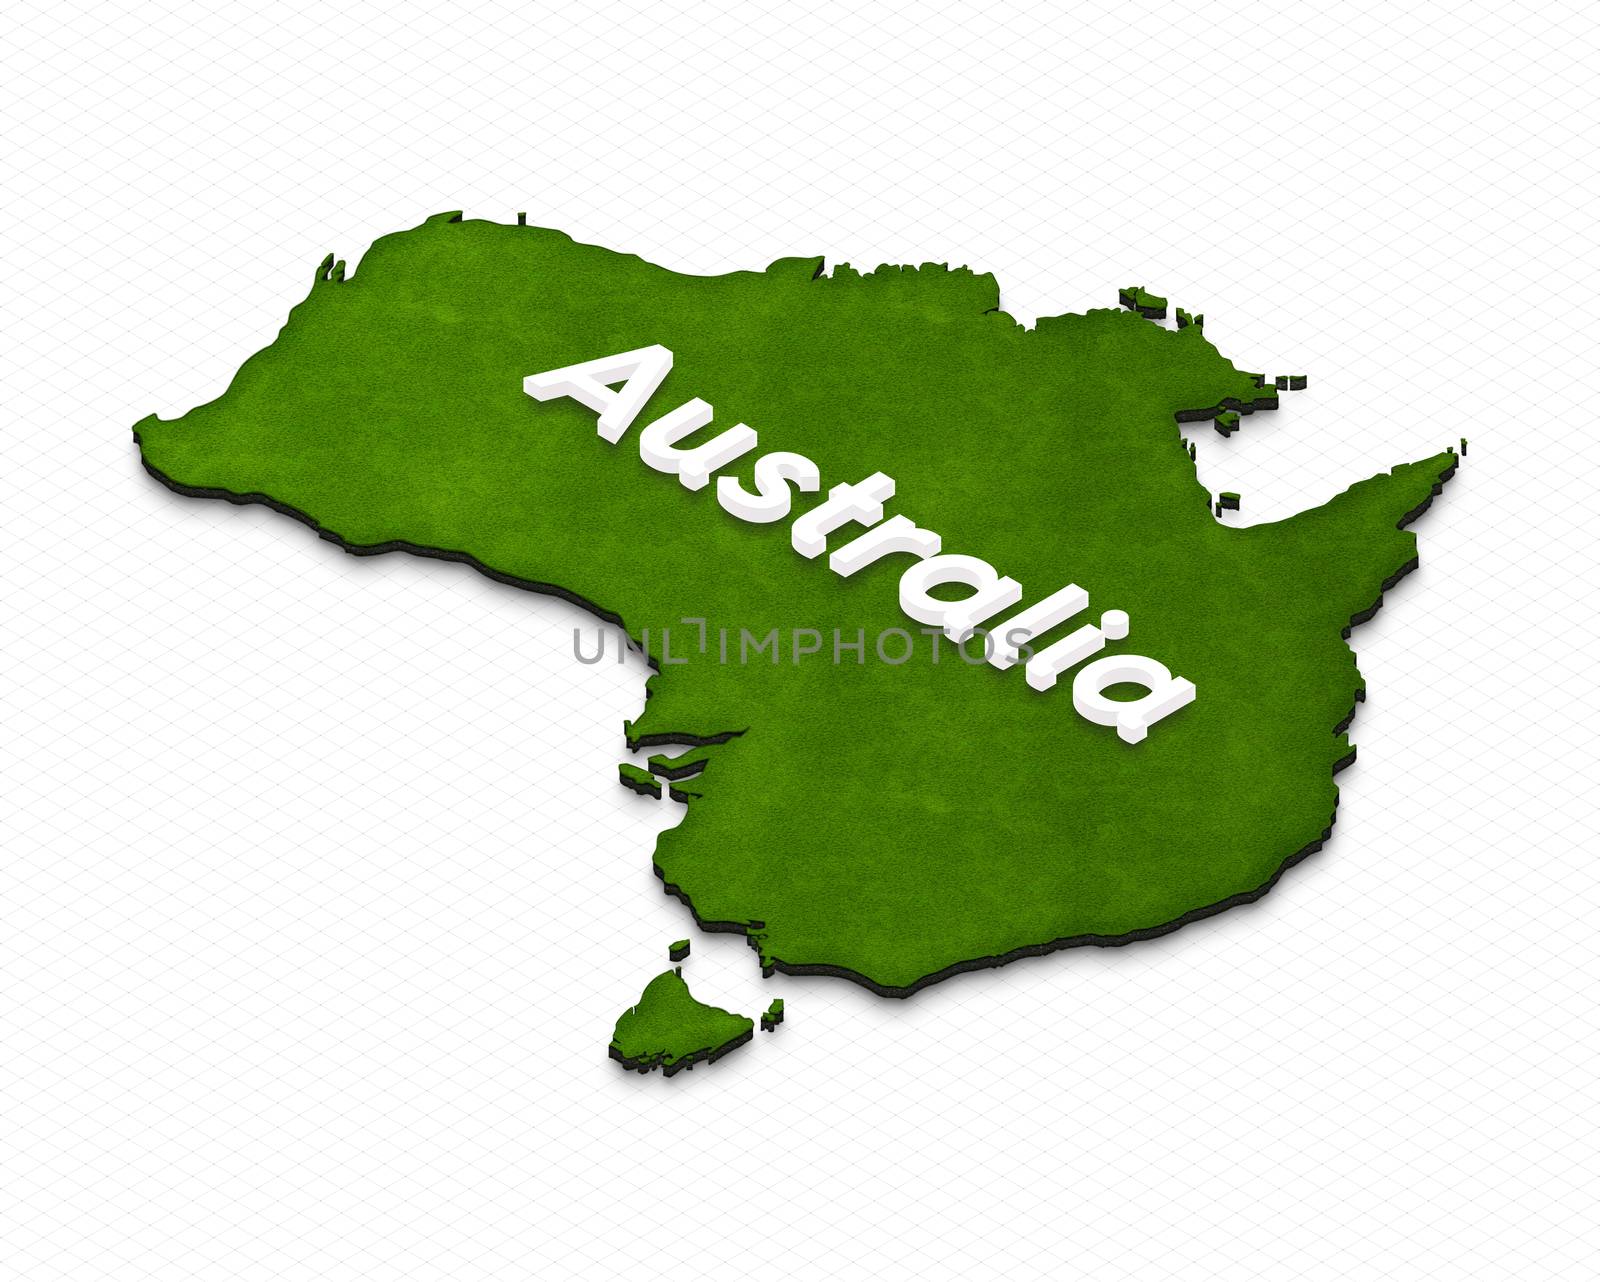 Illustration of a green ground map of Australia on grid background. Left 3D isometric projection with the name of continent.